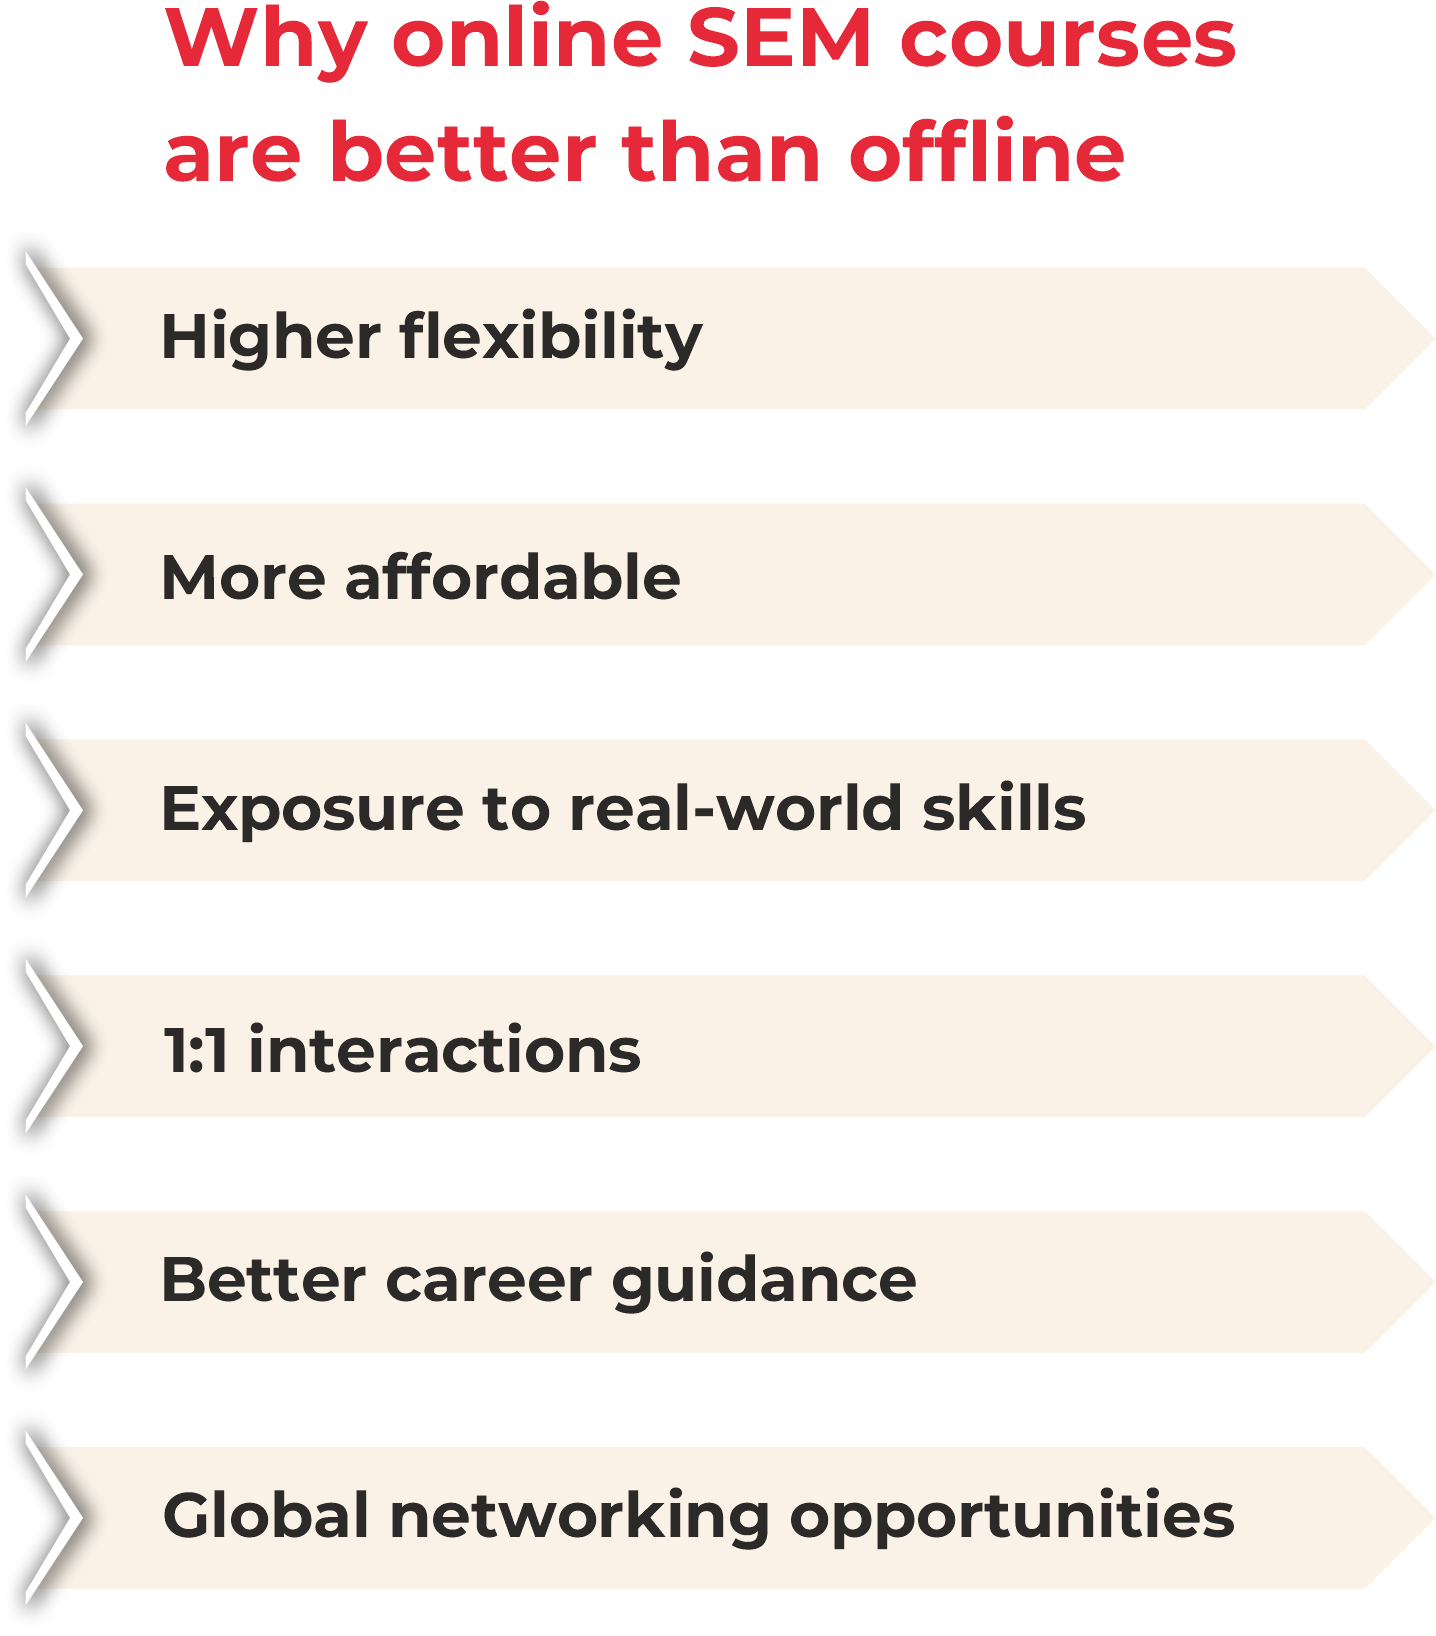 Why Online SEM Courses are better than Offline